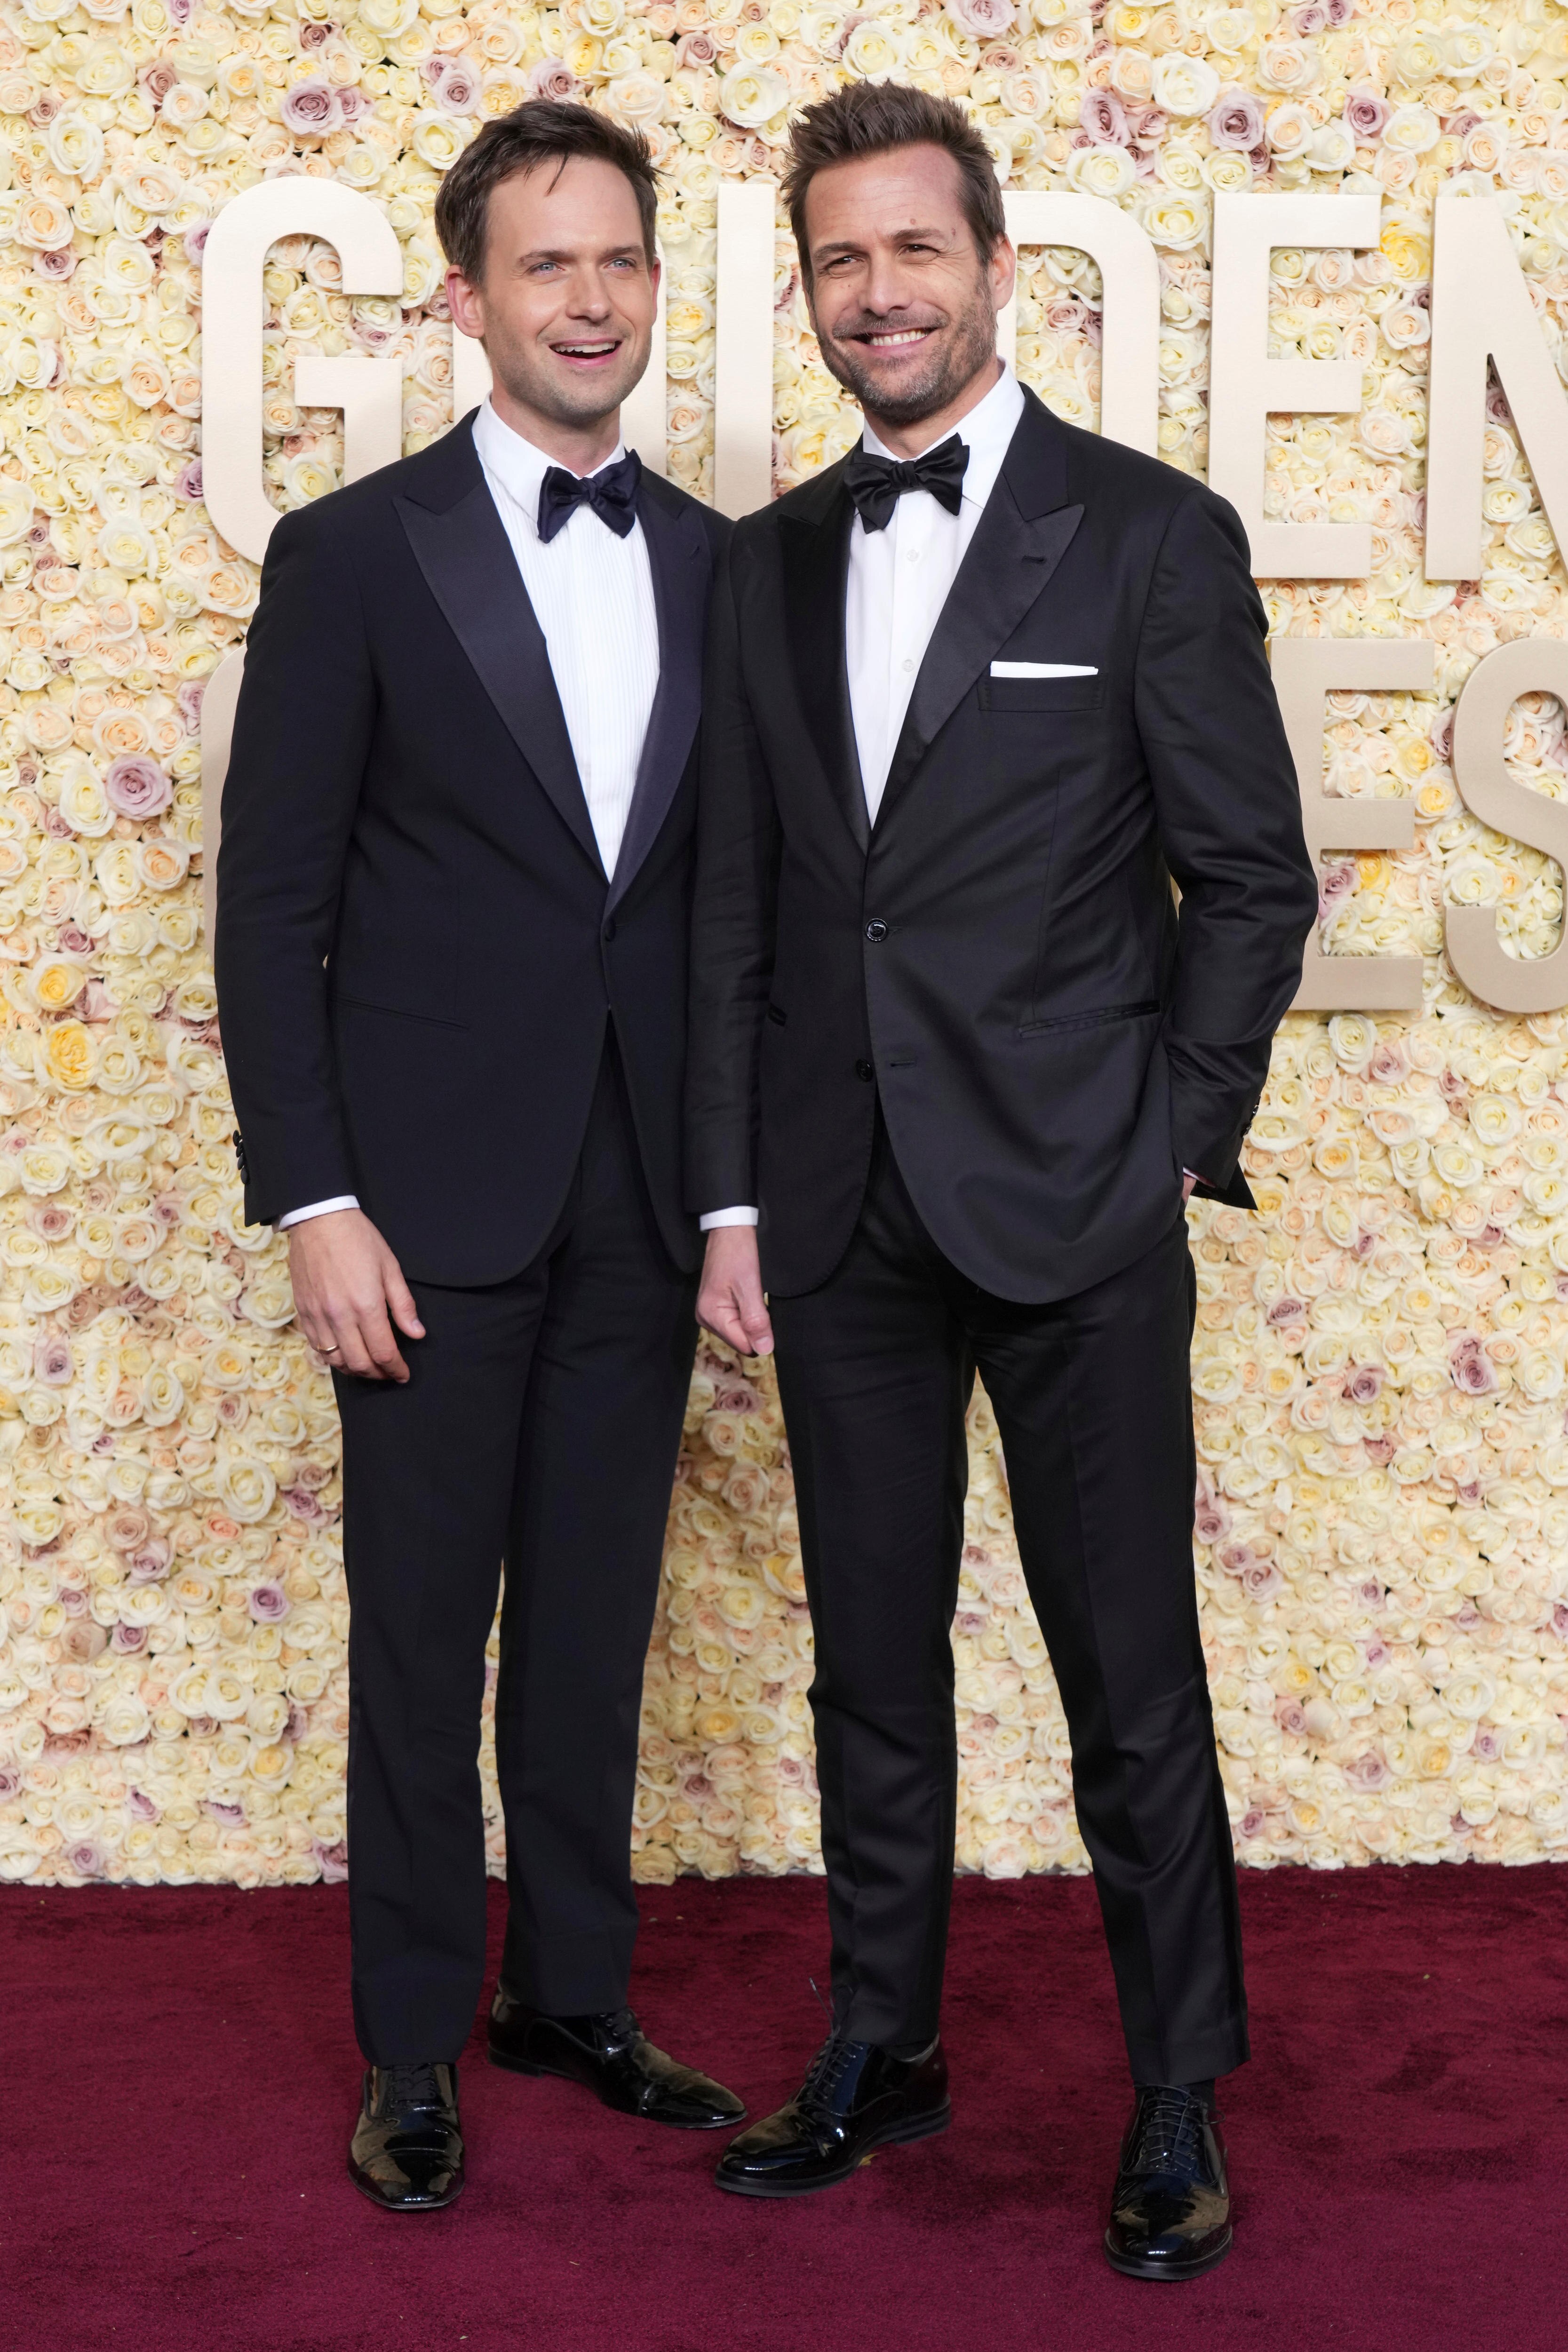 Two actors on the red carpet both wearing black suits